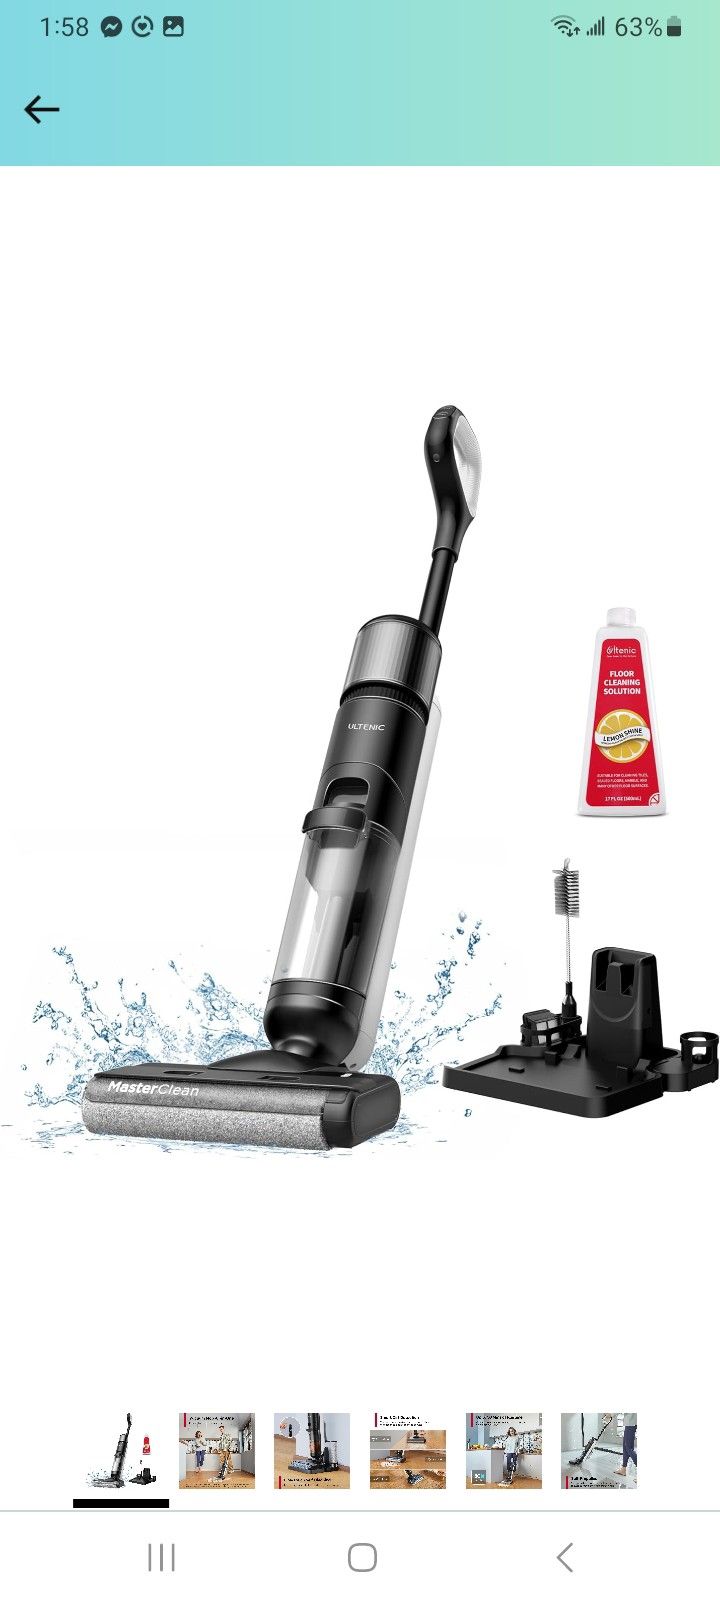 Cordless Vacuum Mop Combo, Wet Dry Vacuum Cleaner with Self-Cleaning, Long Runtime, Smart Mess Detection, LCD Display, Great for Hard Floors and Stick